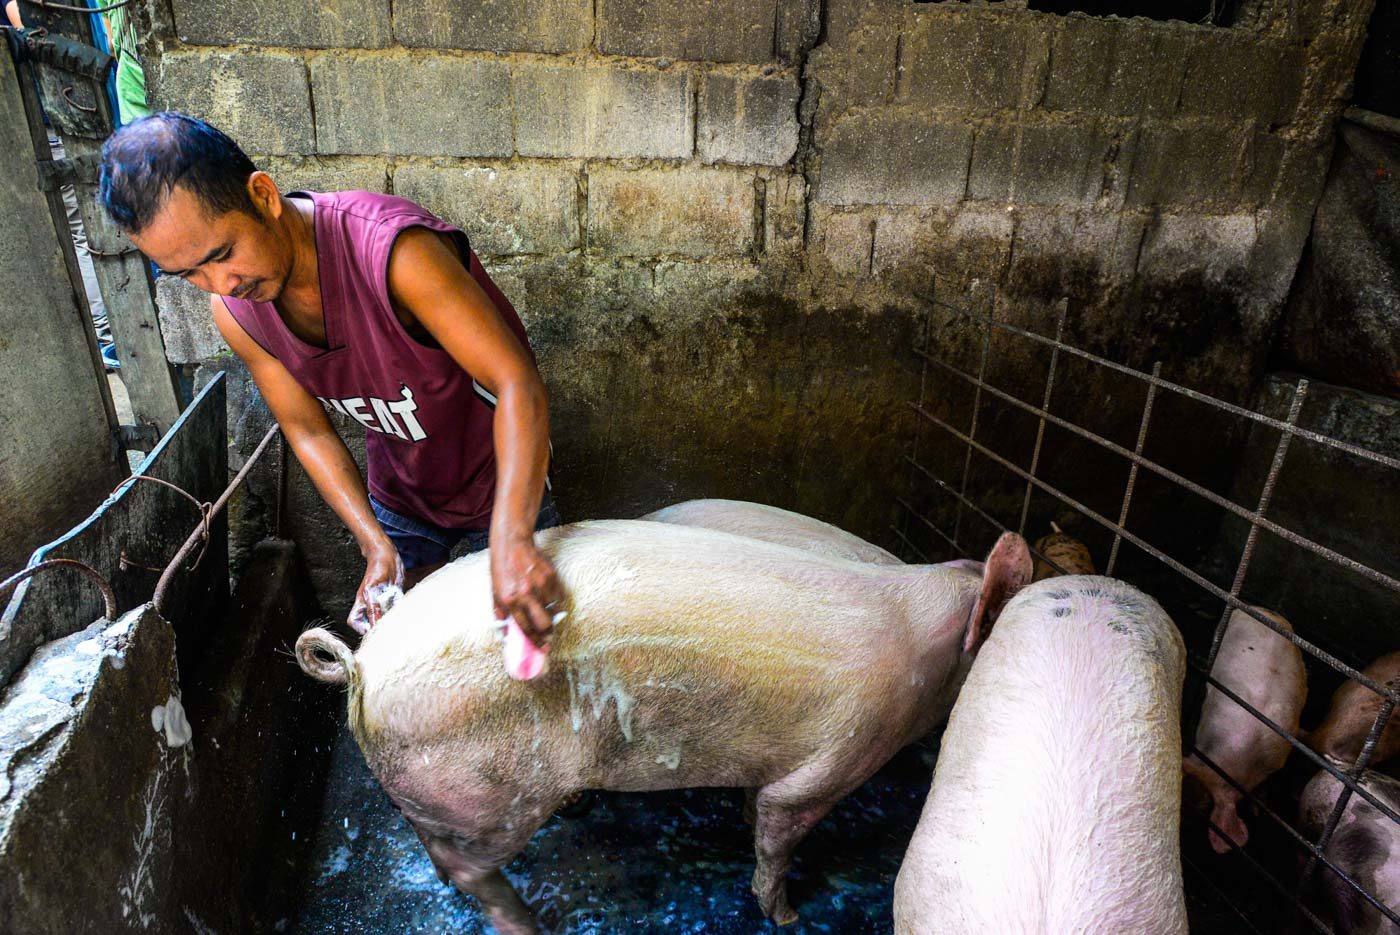 Agriculture department allots P78 million to control African swine fever